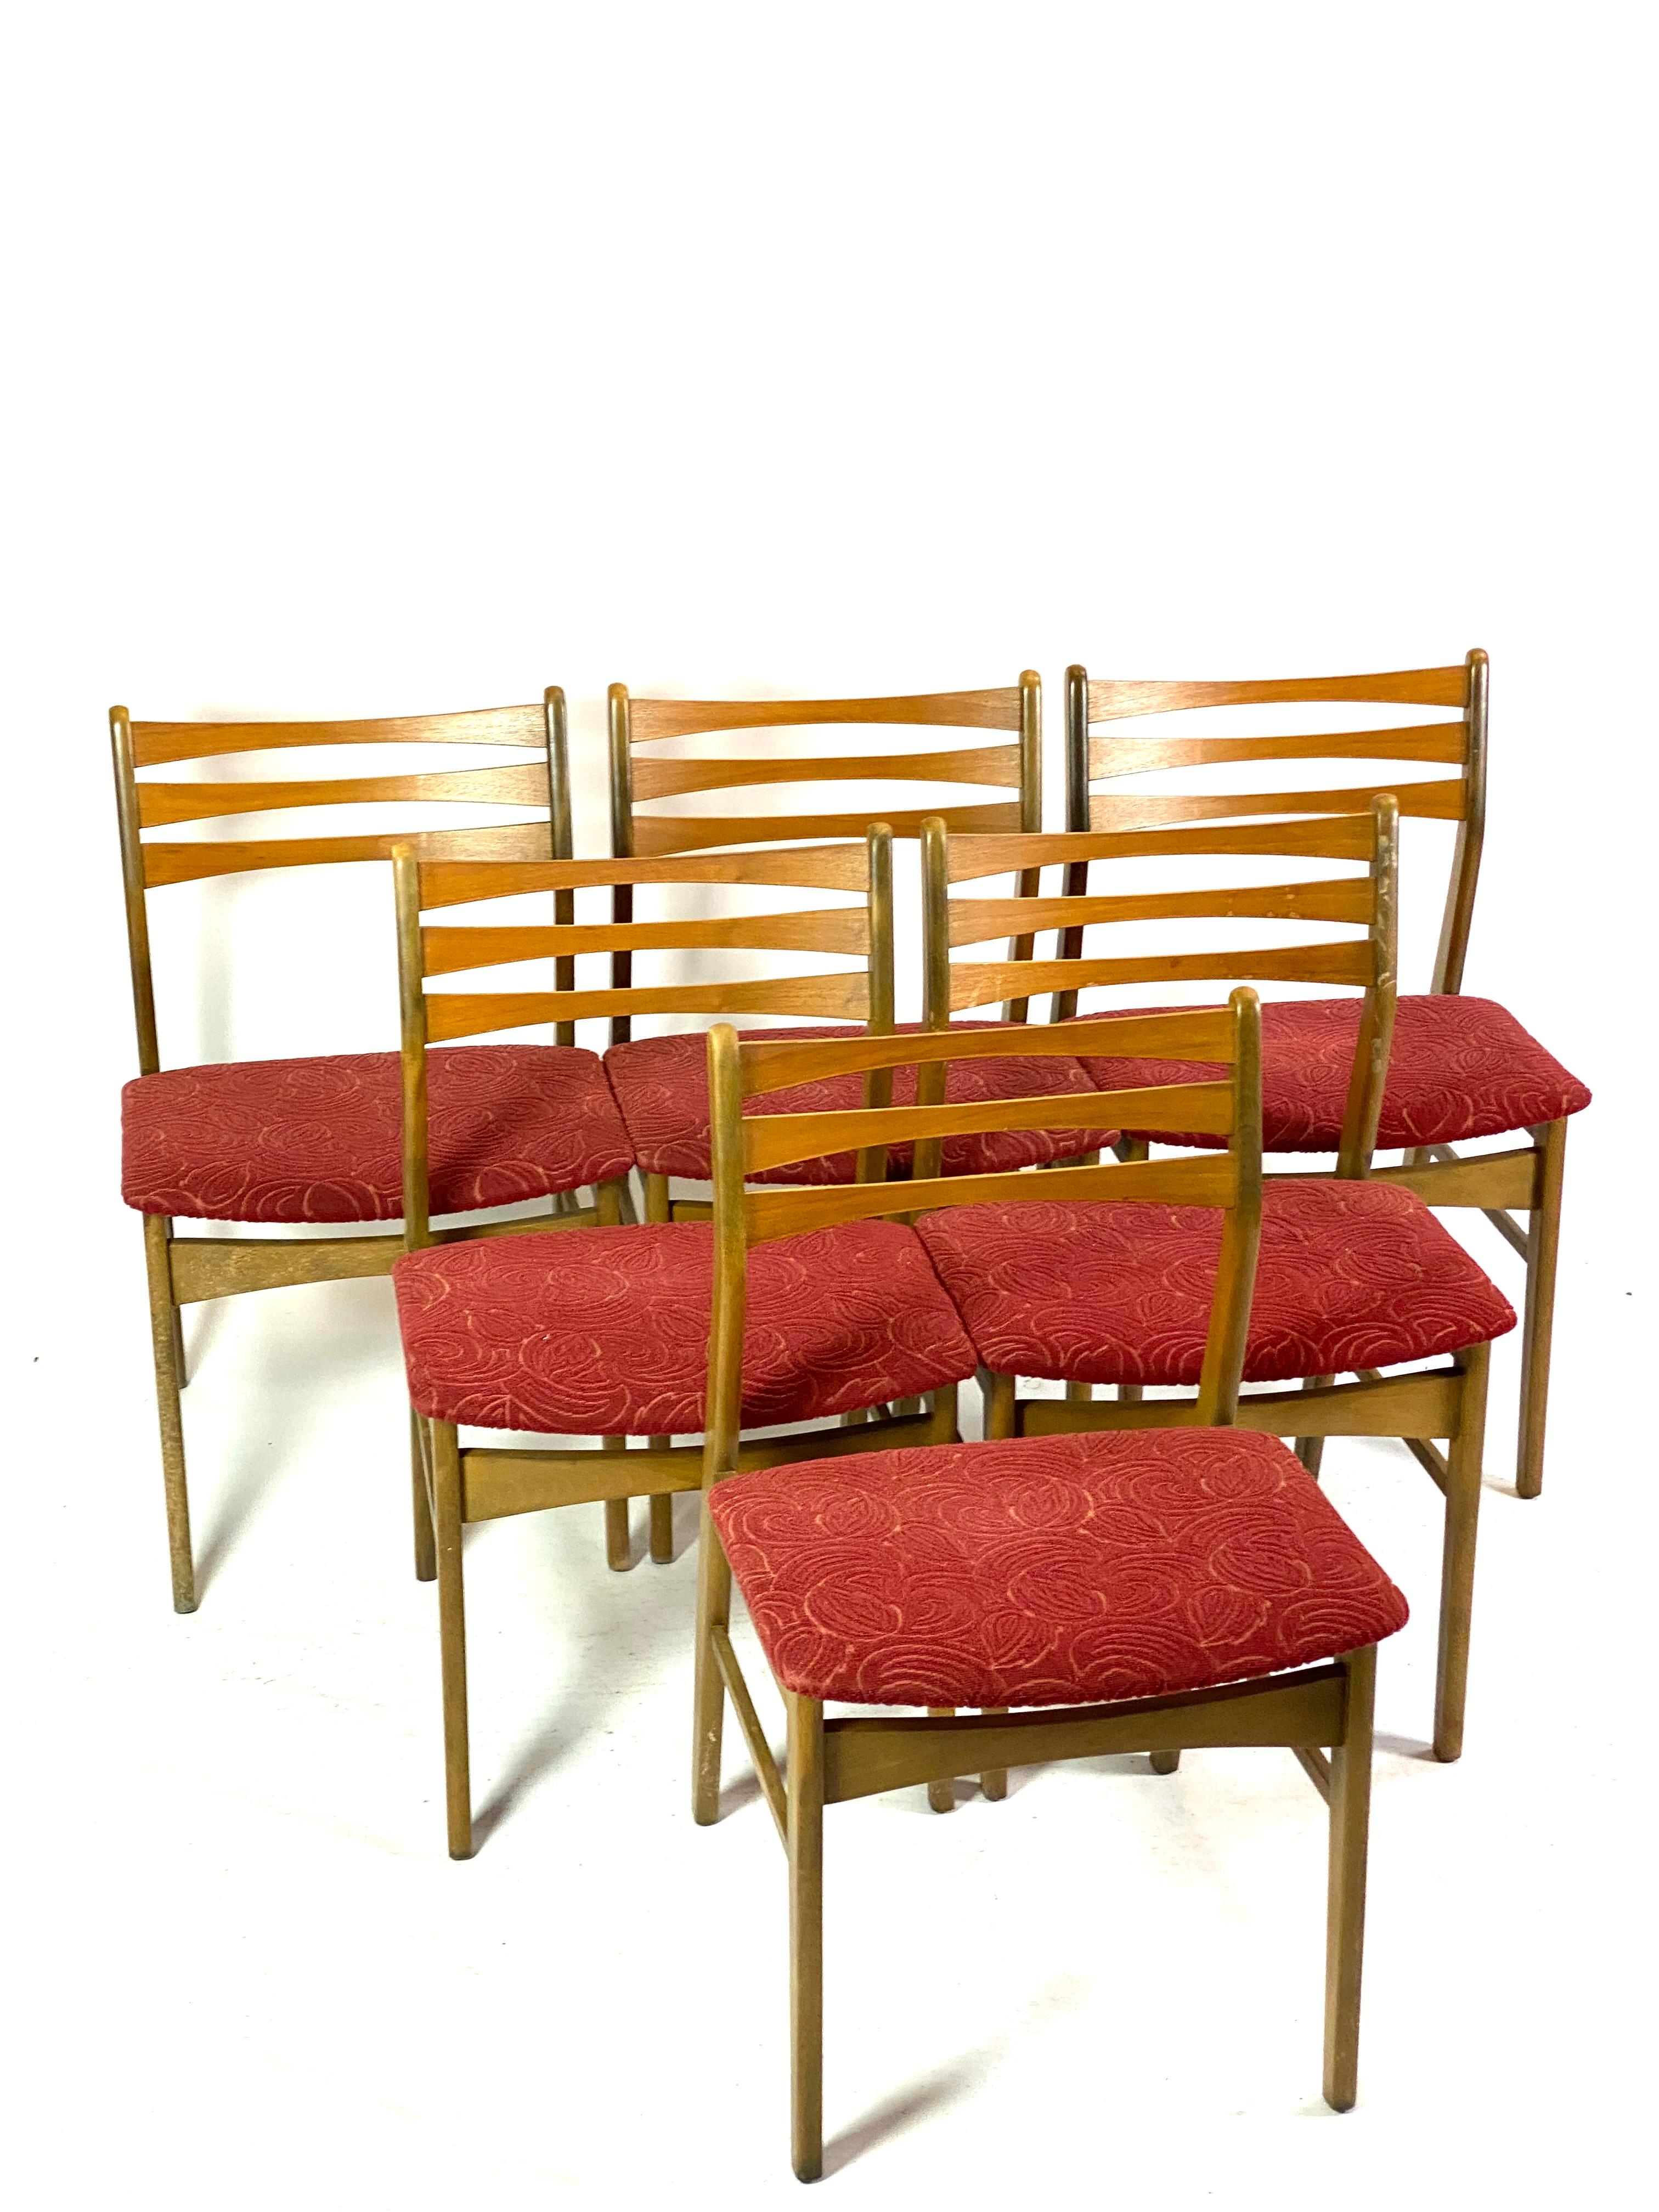 Six dining room chairs in dark polished wood and upholstered with red fabric, of Danish design from the 1960s. The chairs are in great vintage condition.